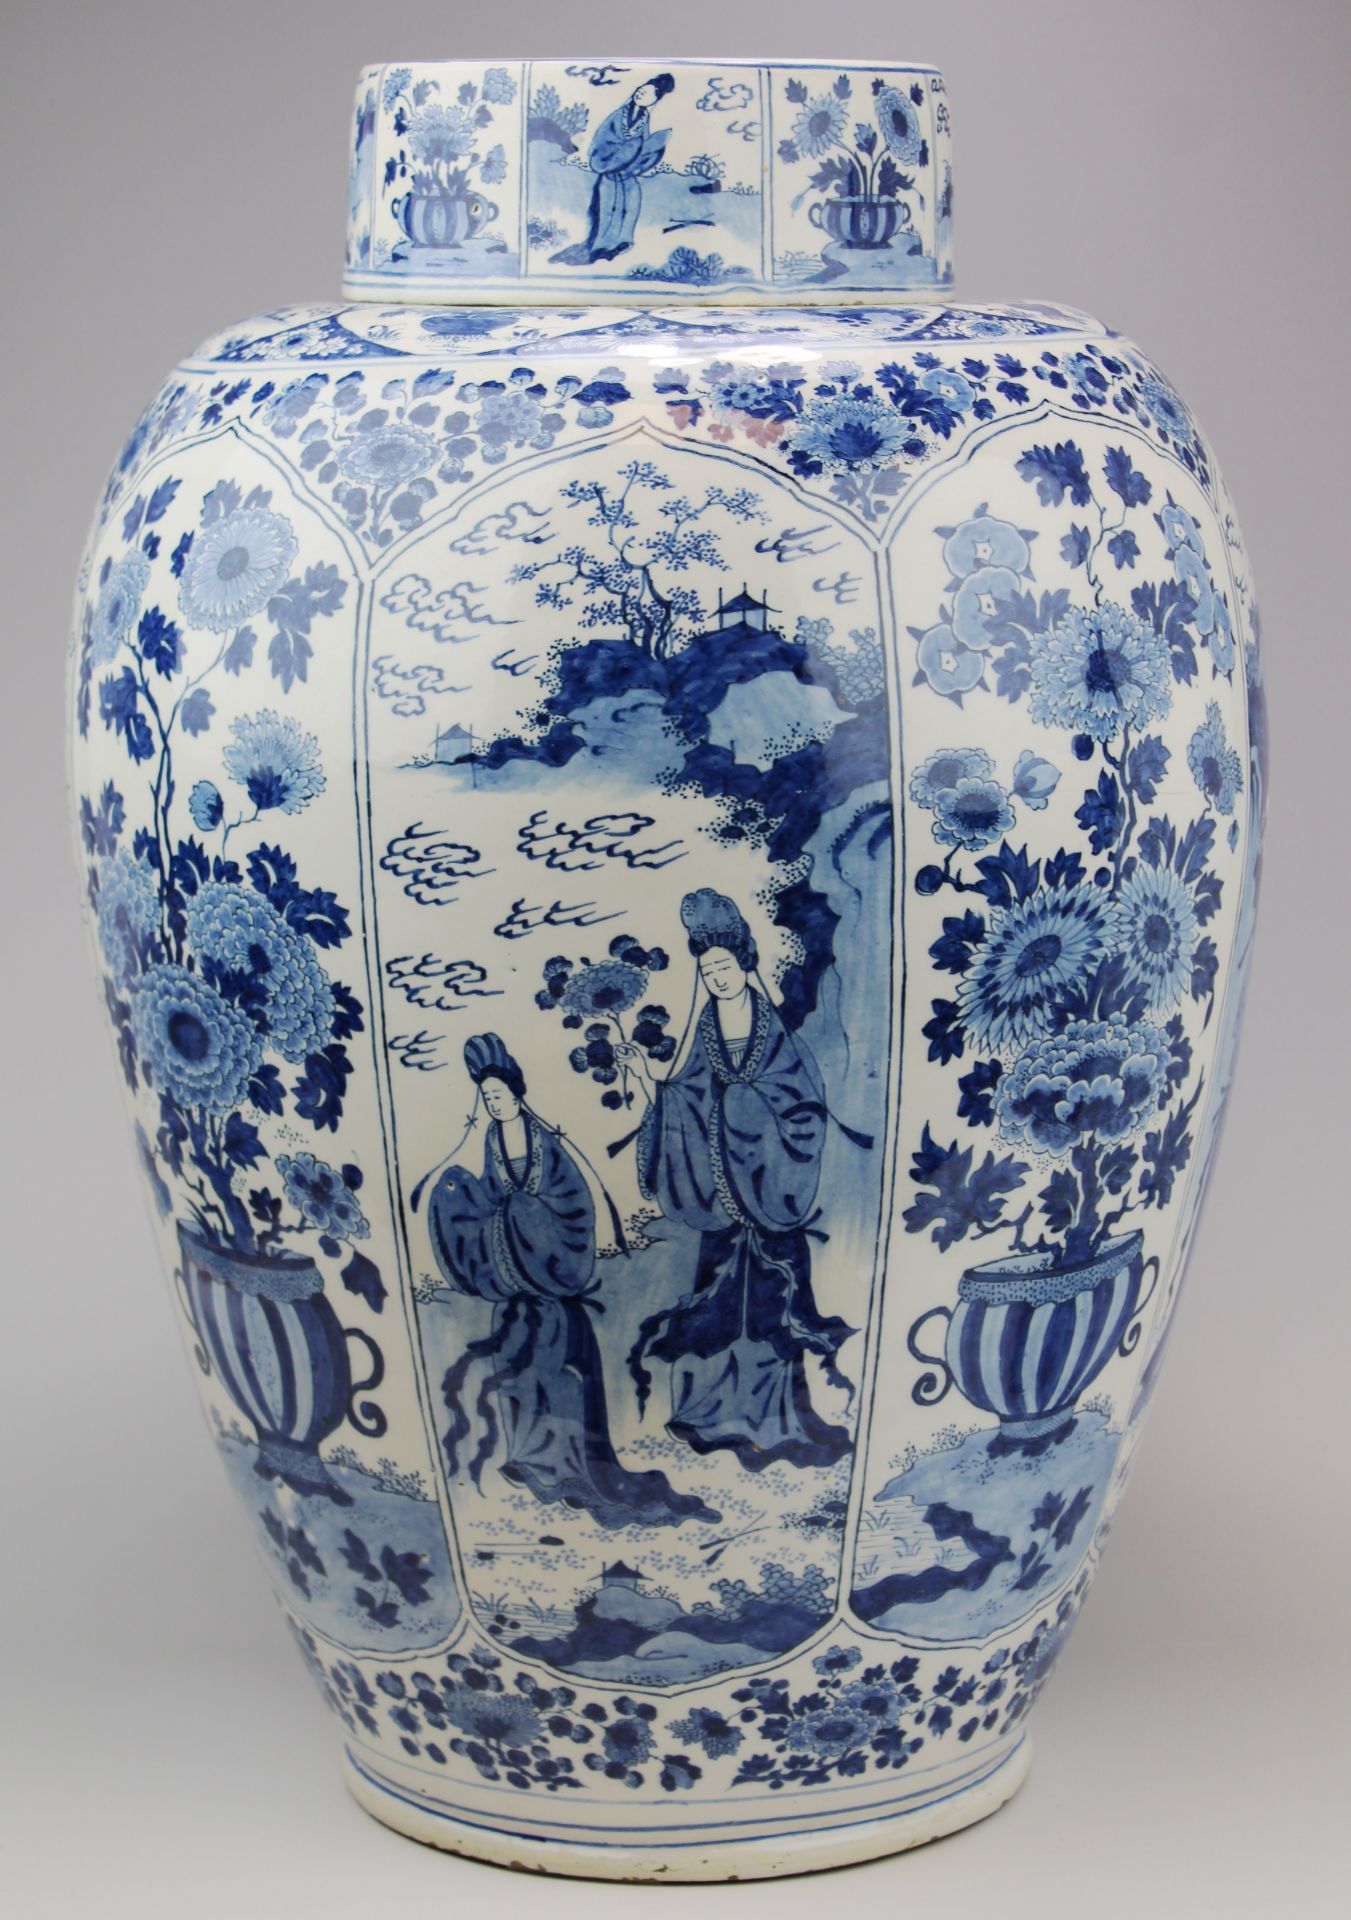 A large Dutch Delft blue and white covered vase on wooden stand - Image 2 of 2